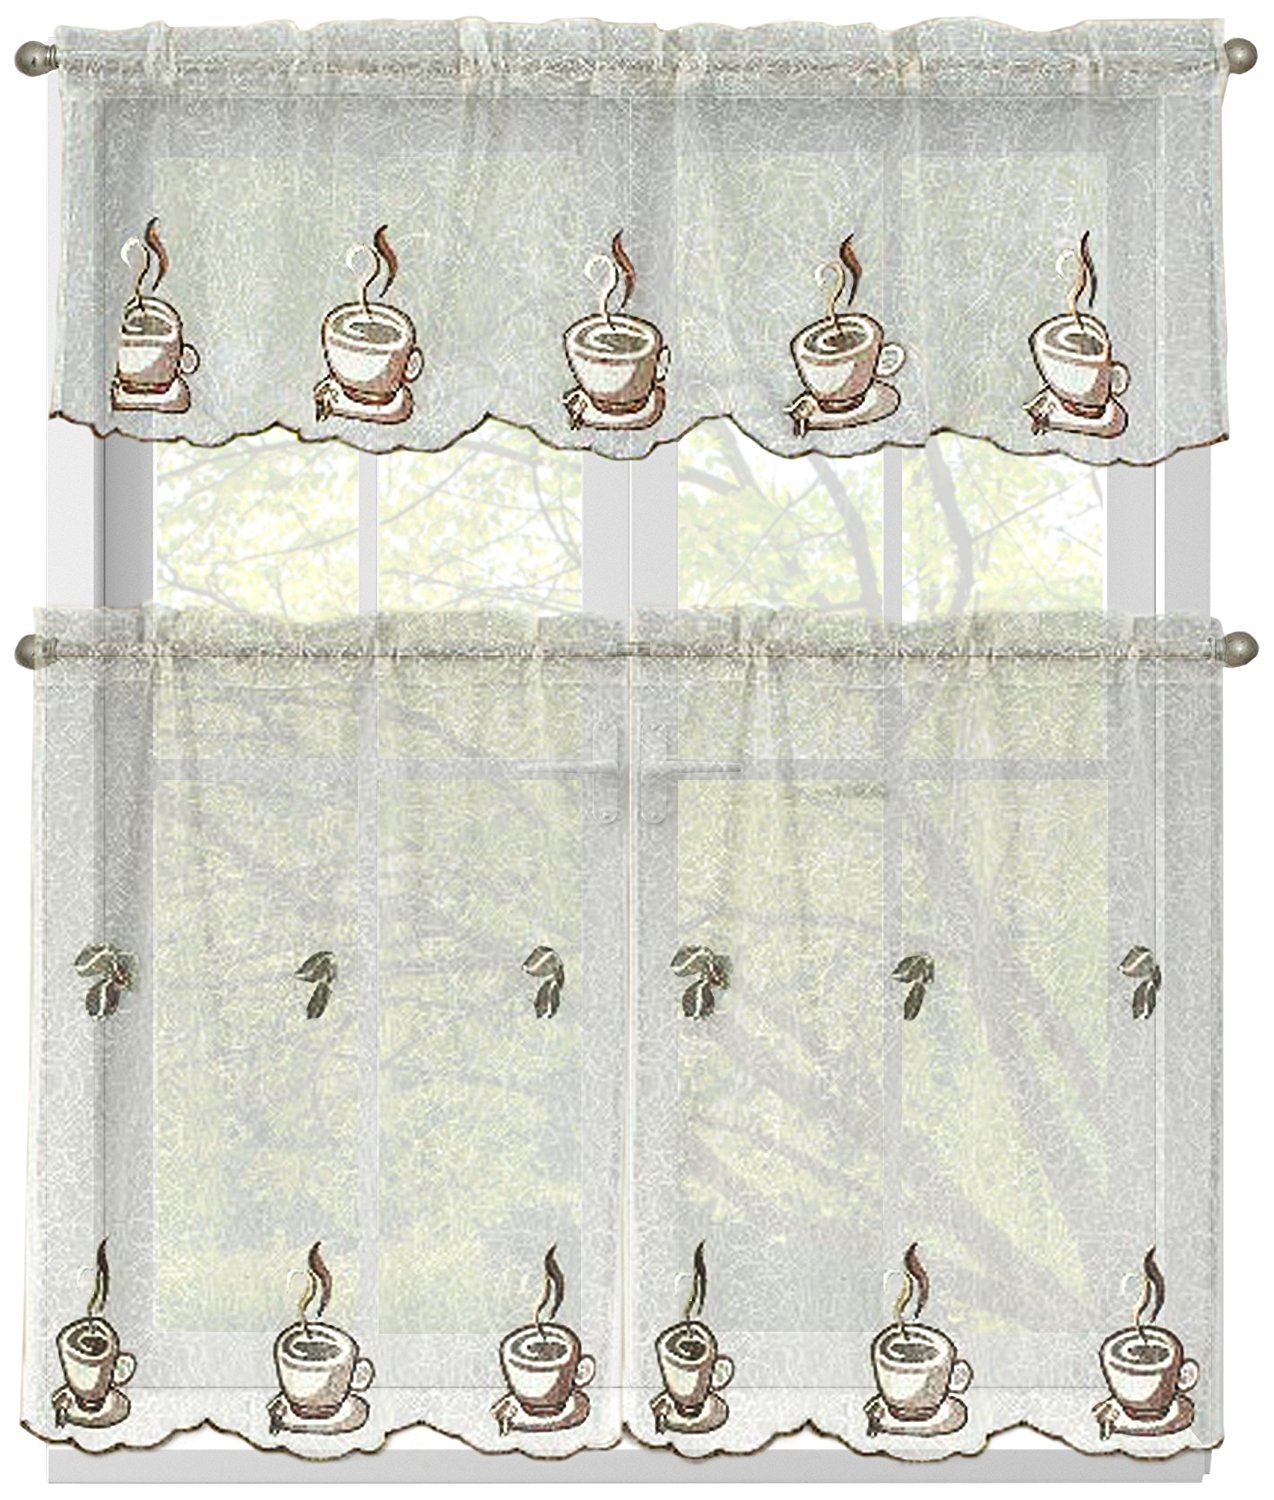 Window Elements Embroidered 3-Piece Kitchen Tier and Valance 60 x 54 Set, Three Cups a Day